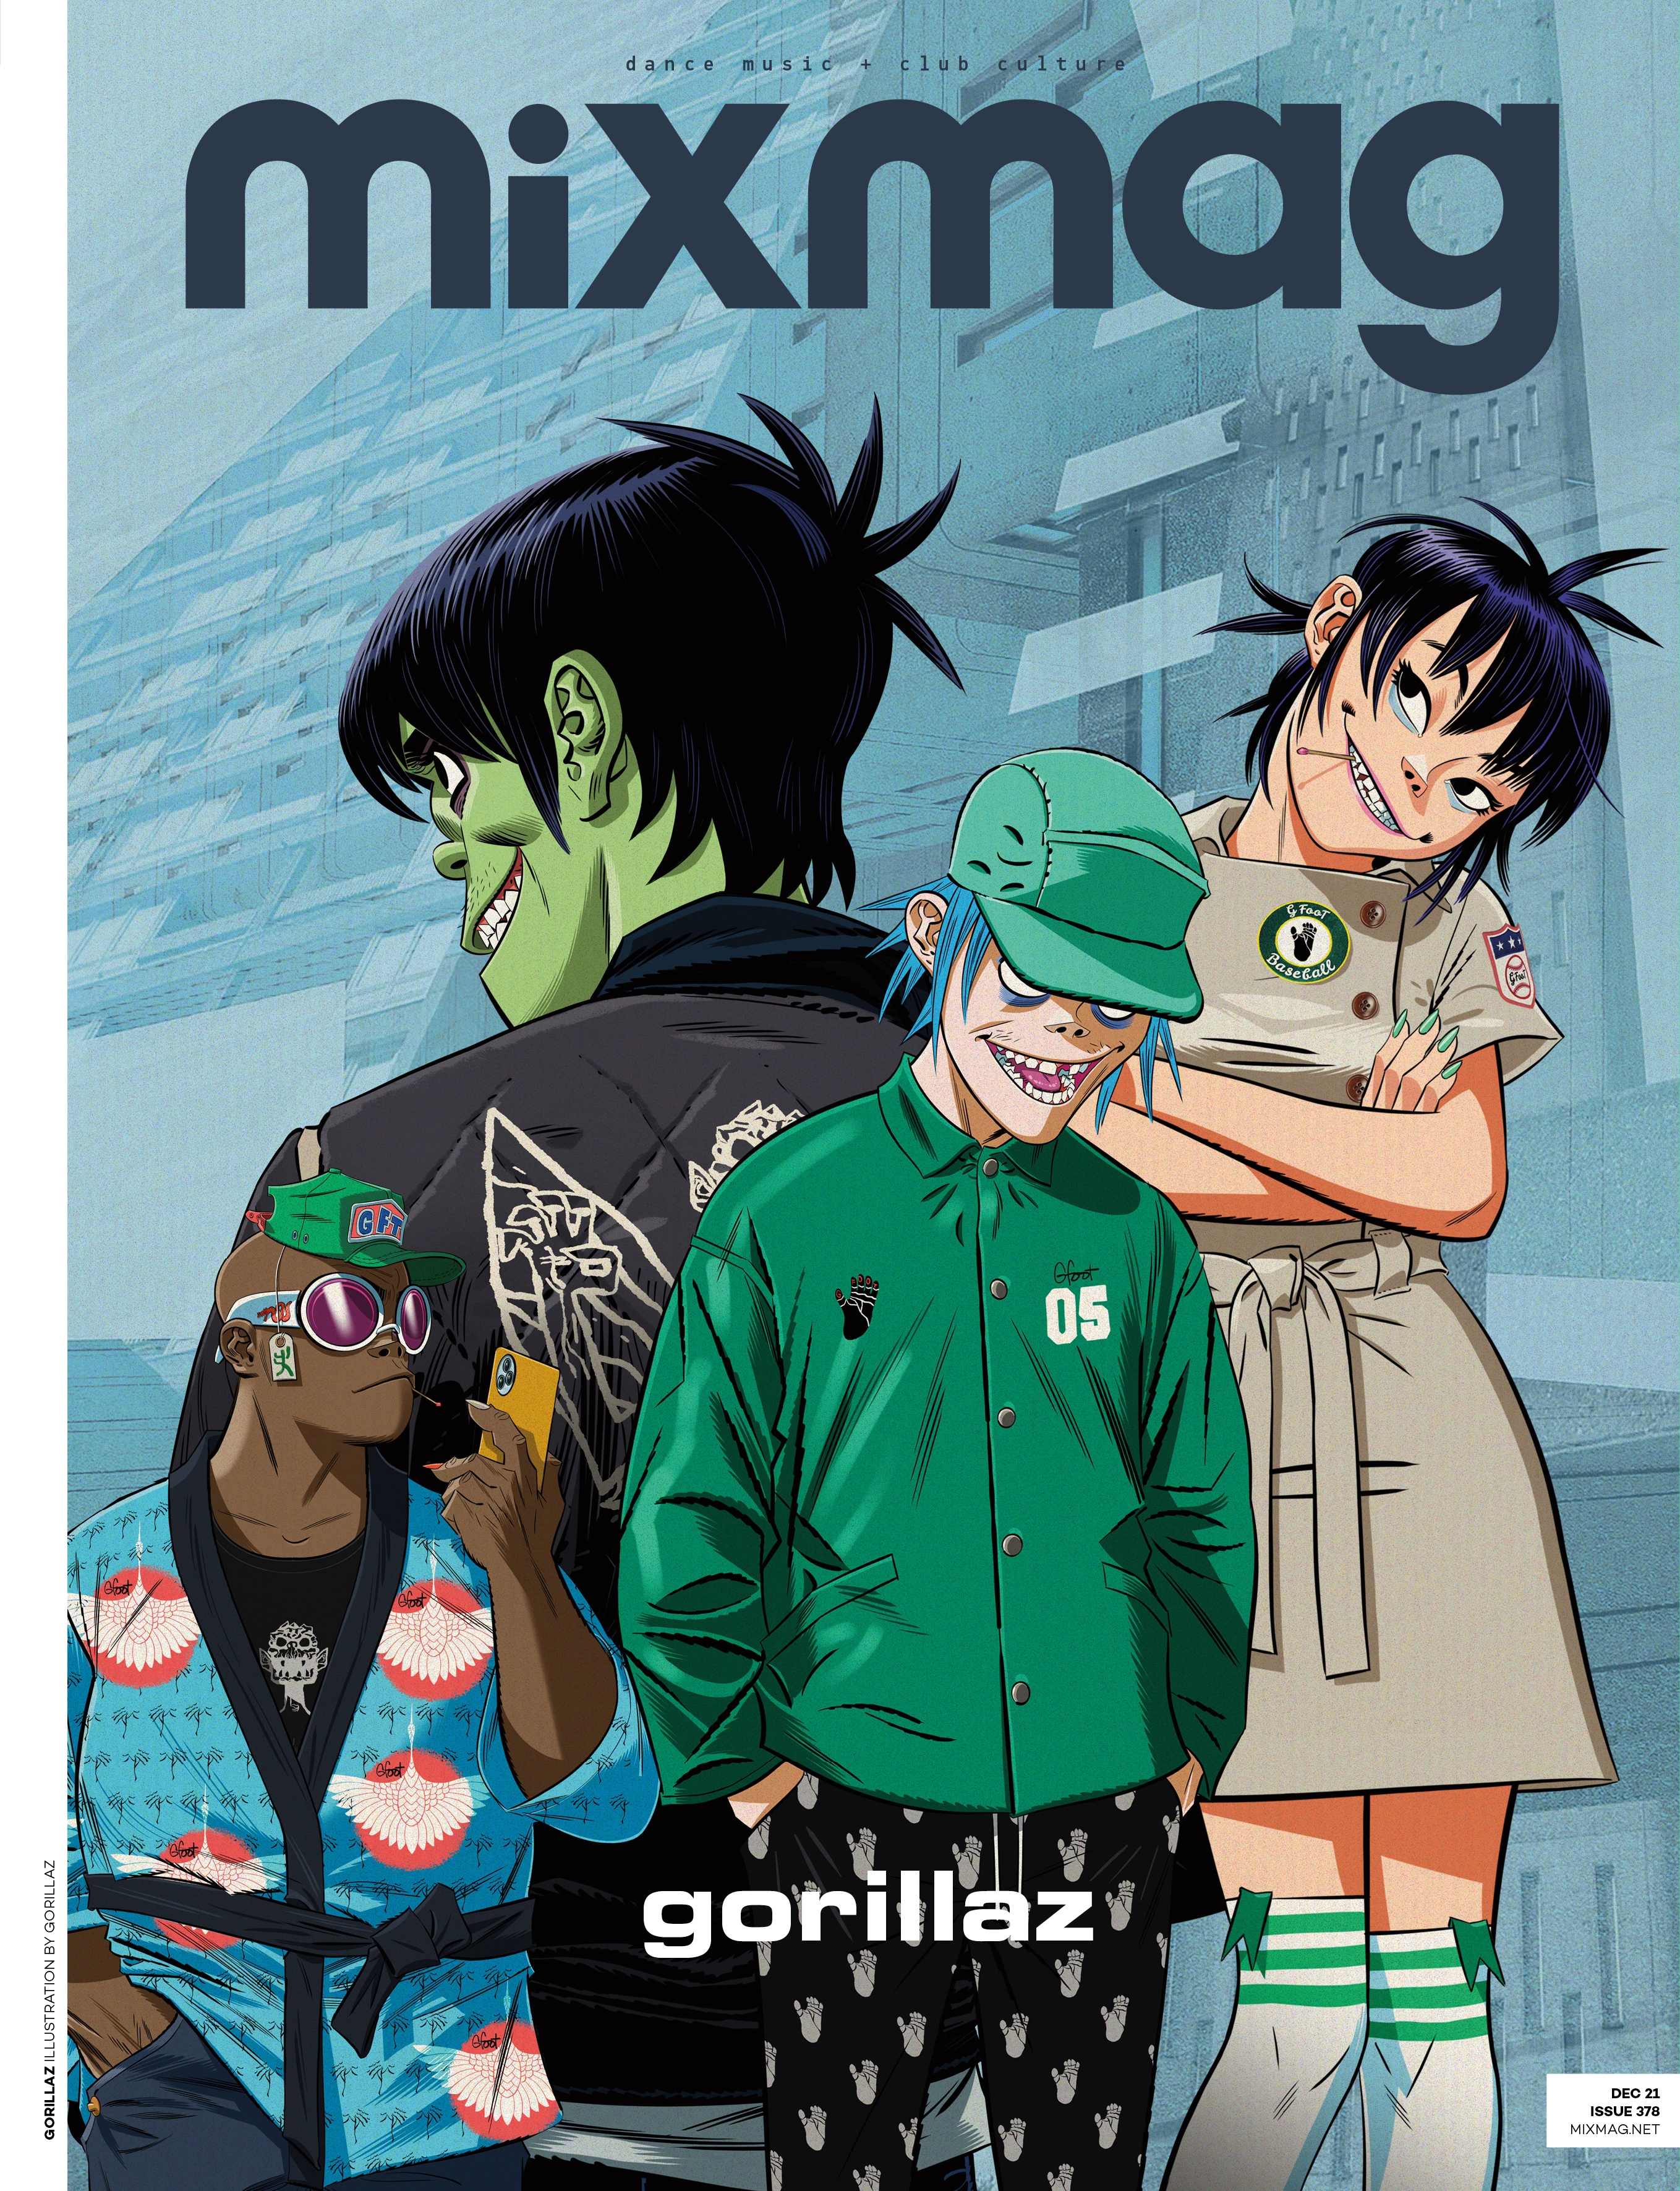 Gorillaz Musical Director Mike Smith in depth as how it all works